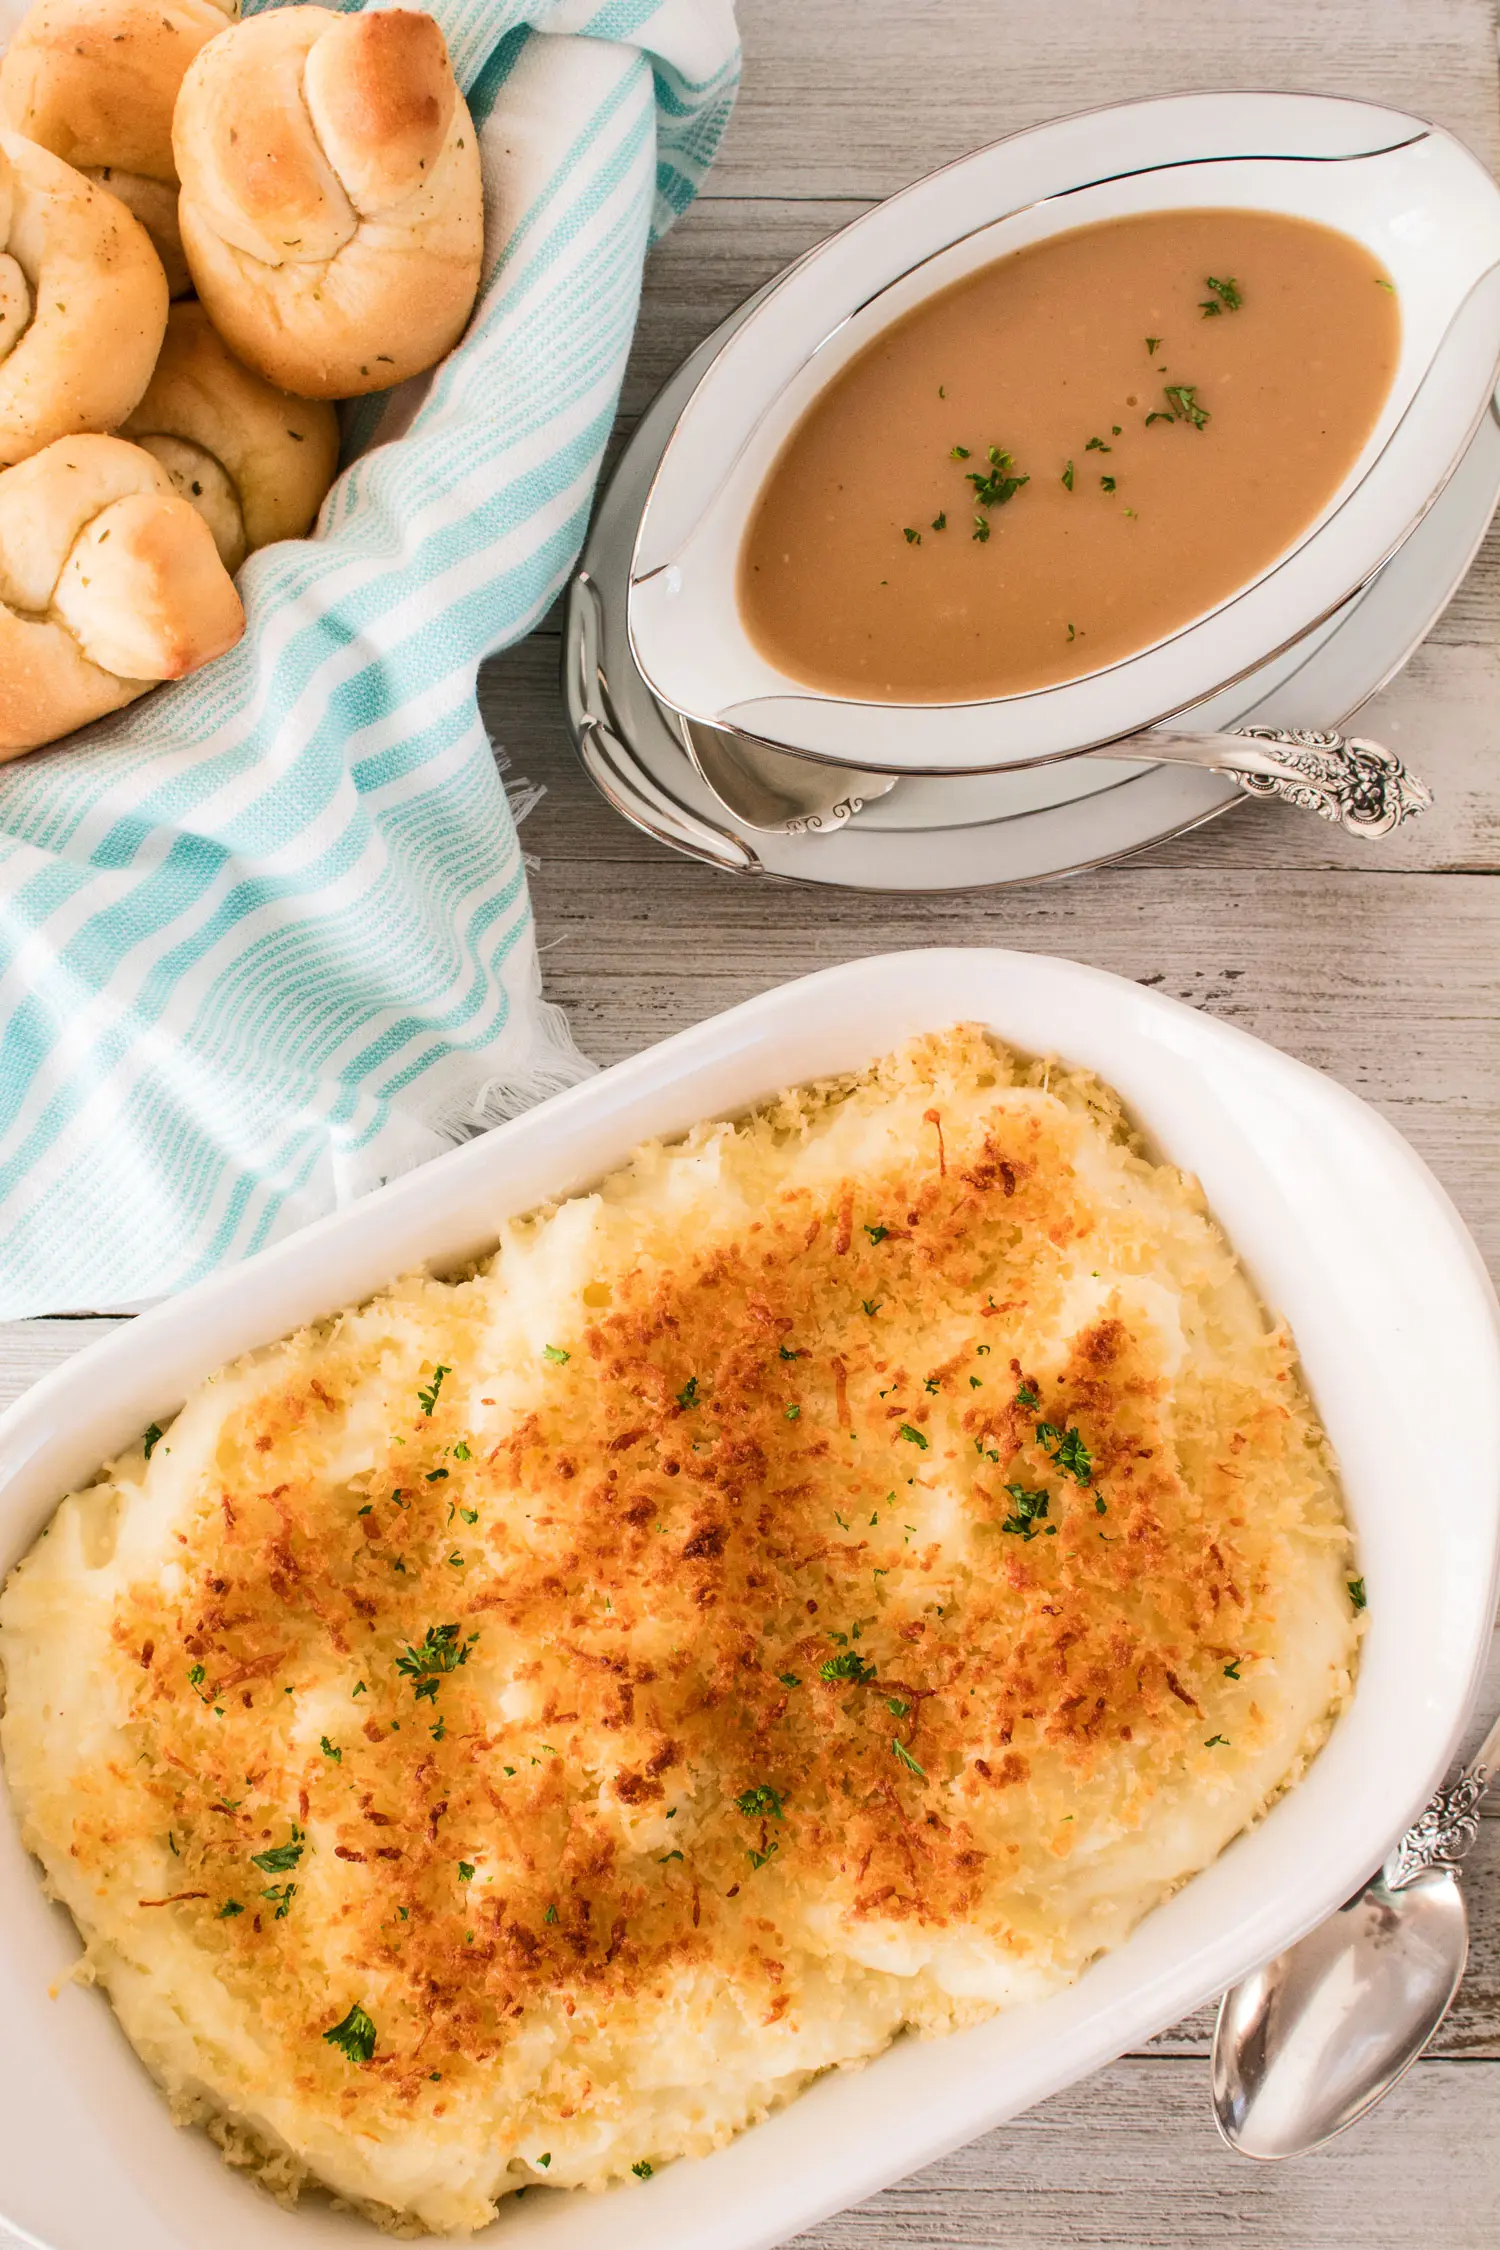 Turkey Gravy with holiday side dishes